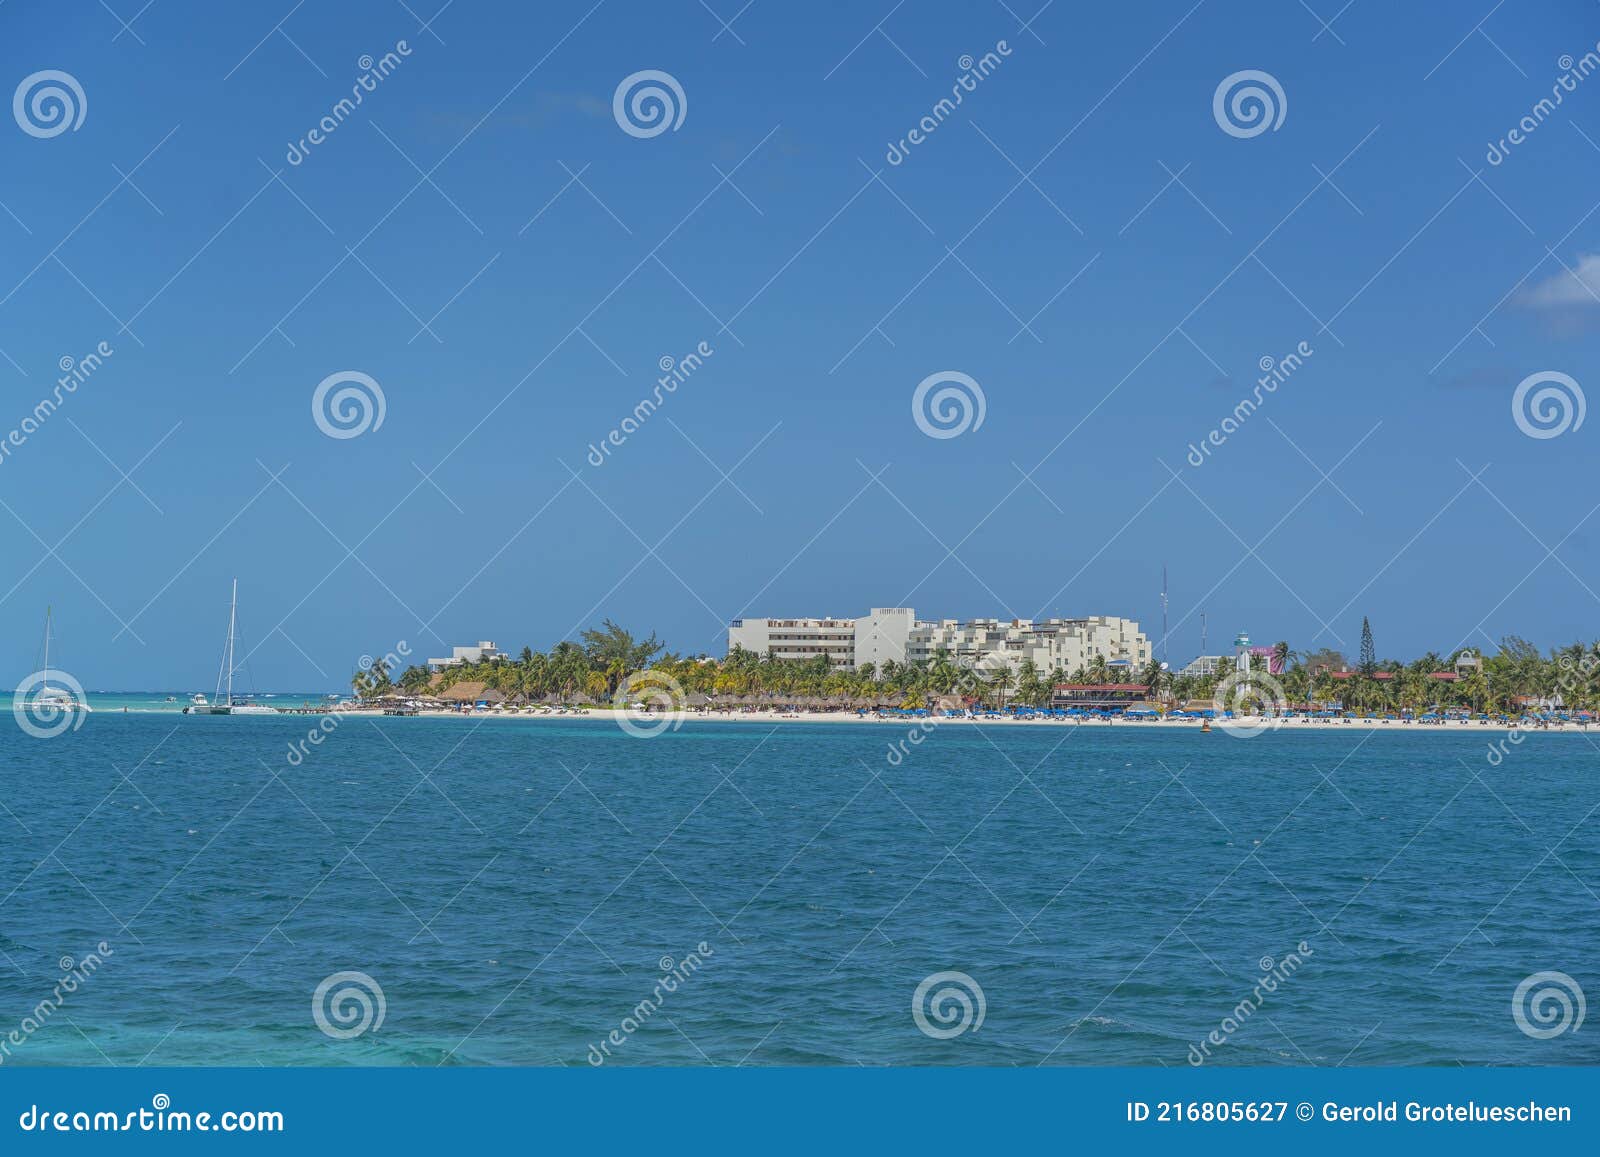 norten beach on colorful isla mujeres island near cancun in mexico, view from the ferry